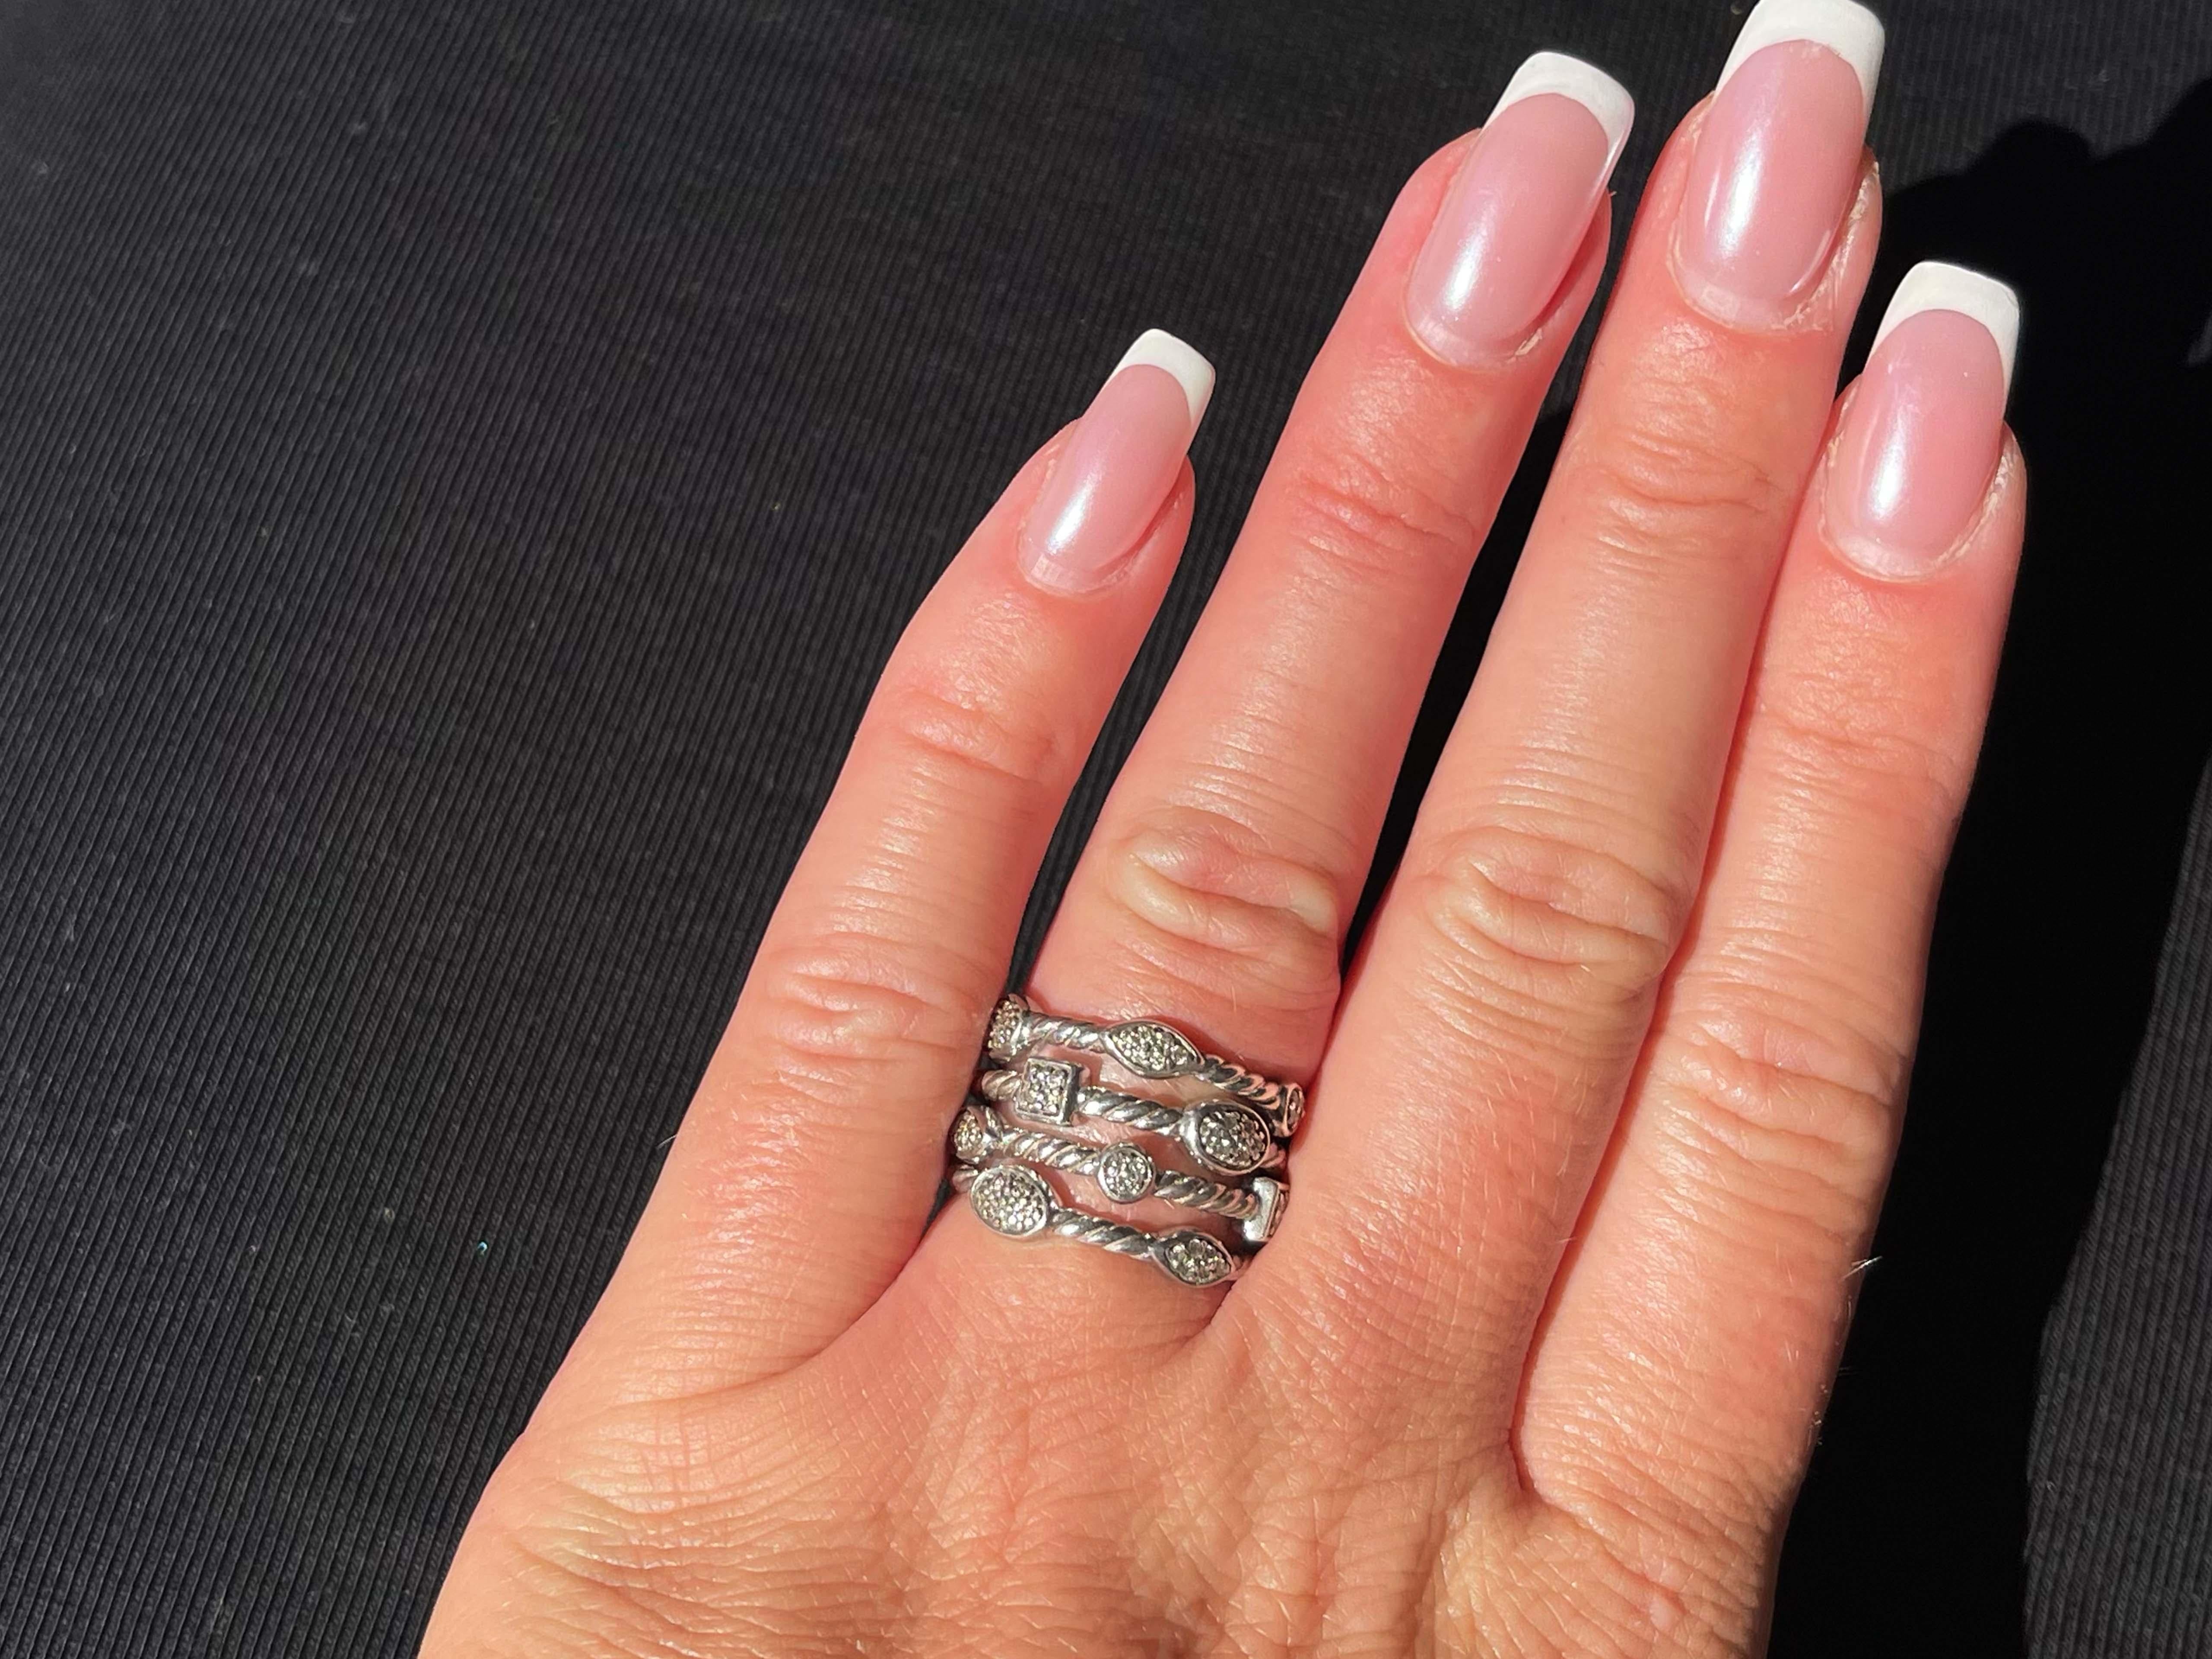 
Ring Specifications:
Designer: David Yurman

Style: Statement Ring

Metal: 925 Sterling Silver

Gemstone: Diamond
​
​Diamond Count: 52 brilliant cut
​
​Diamond Carat Weight: ~0.16

Ring Size: 6.25 (medium)
Total Ring Weight: 7.4 grams

Condition: